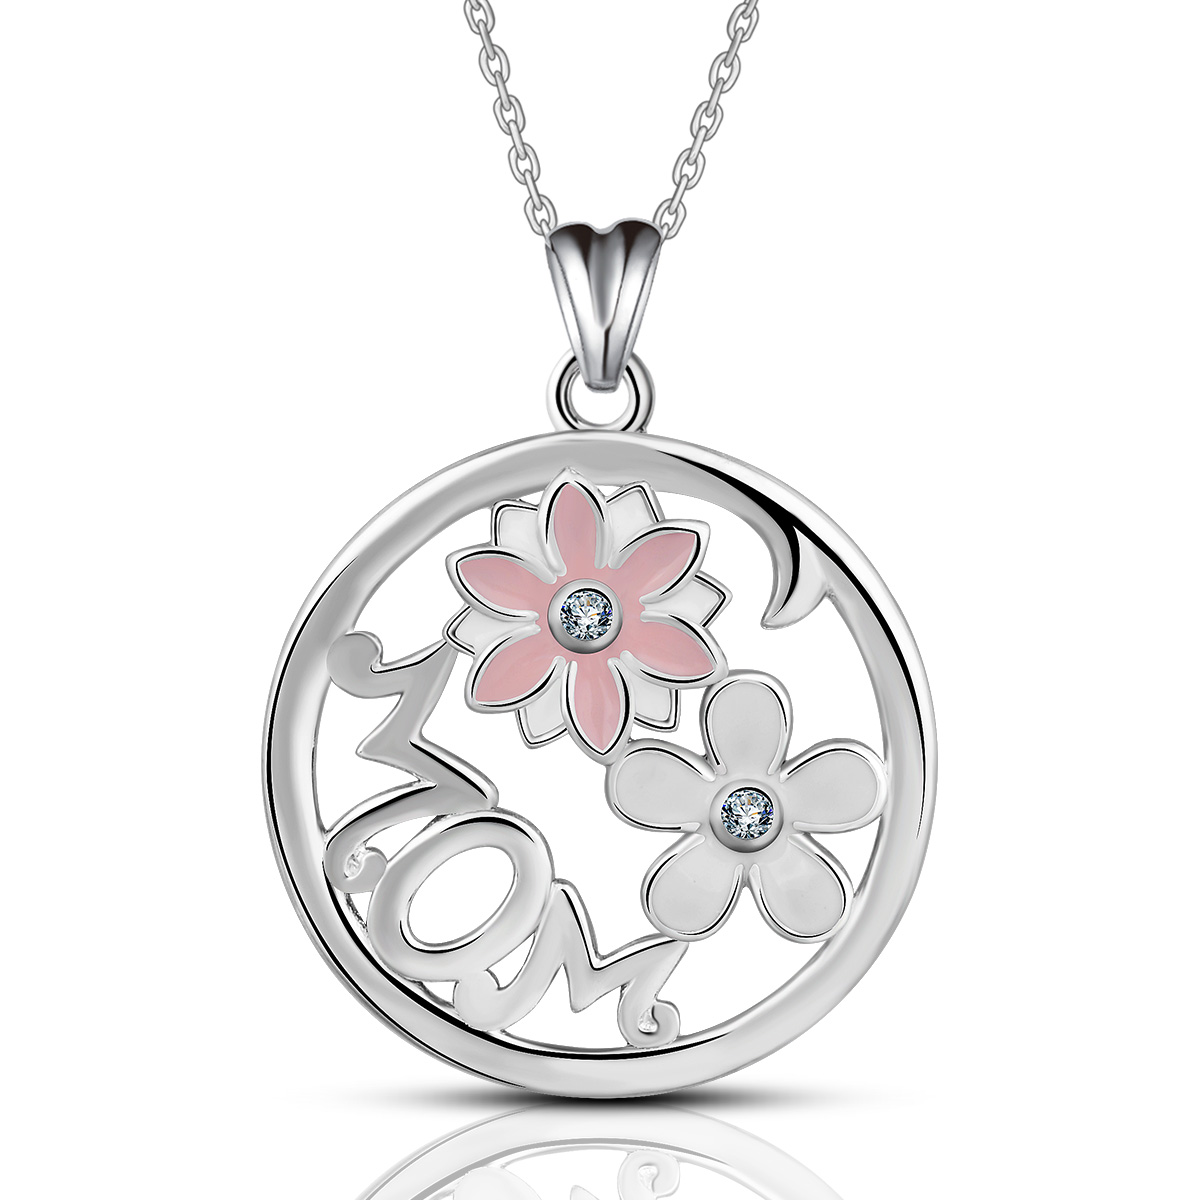 Merryshine Jewelry Fastness Plating Rhodium and Gold Dainty Pink Flower Necklace for Mom